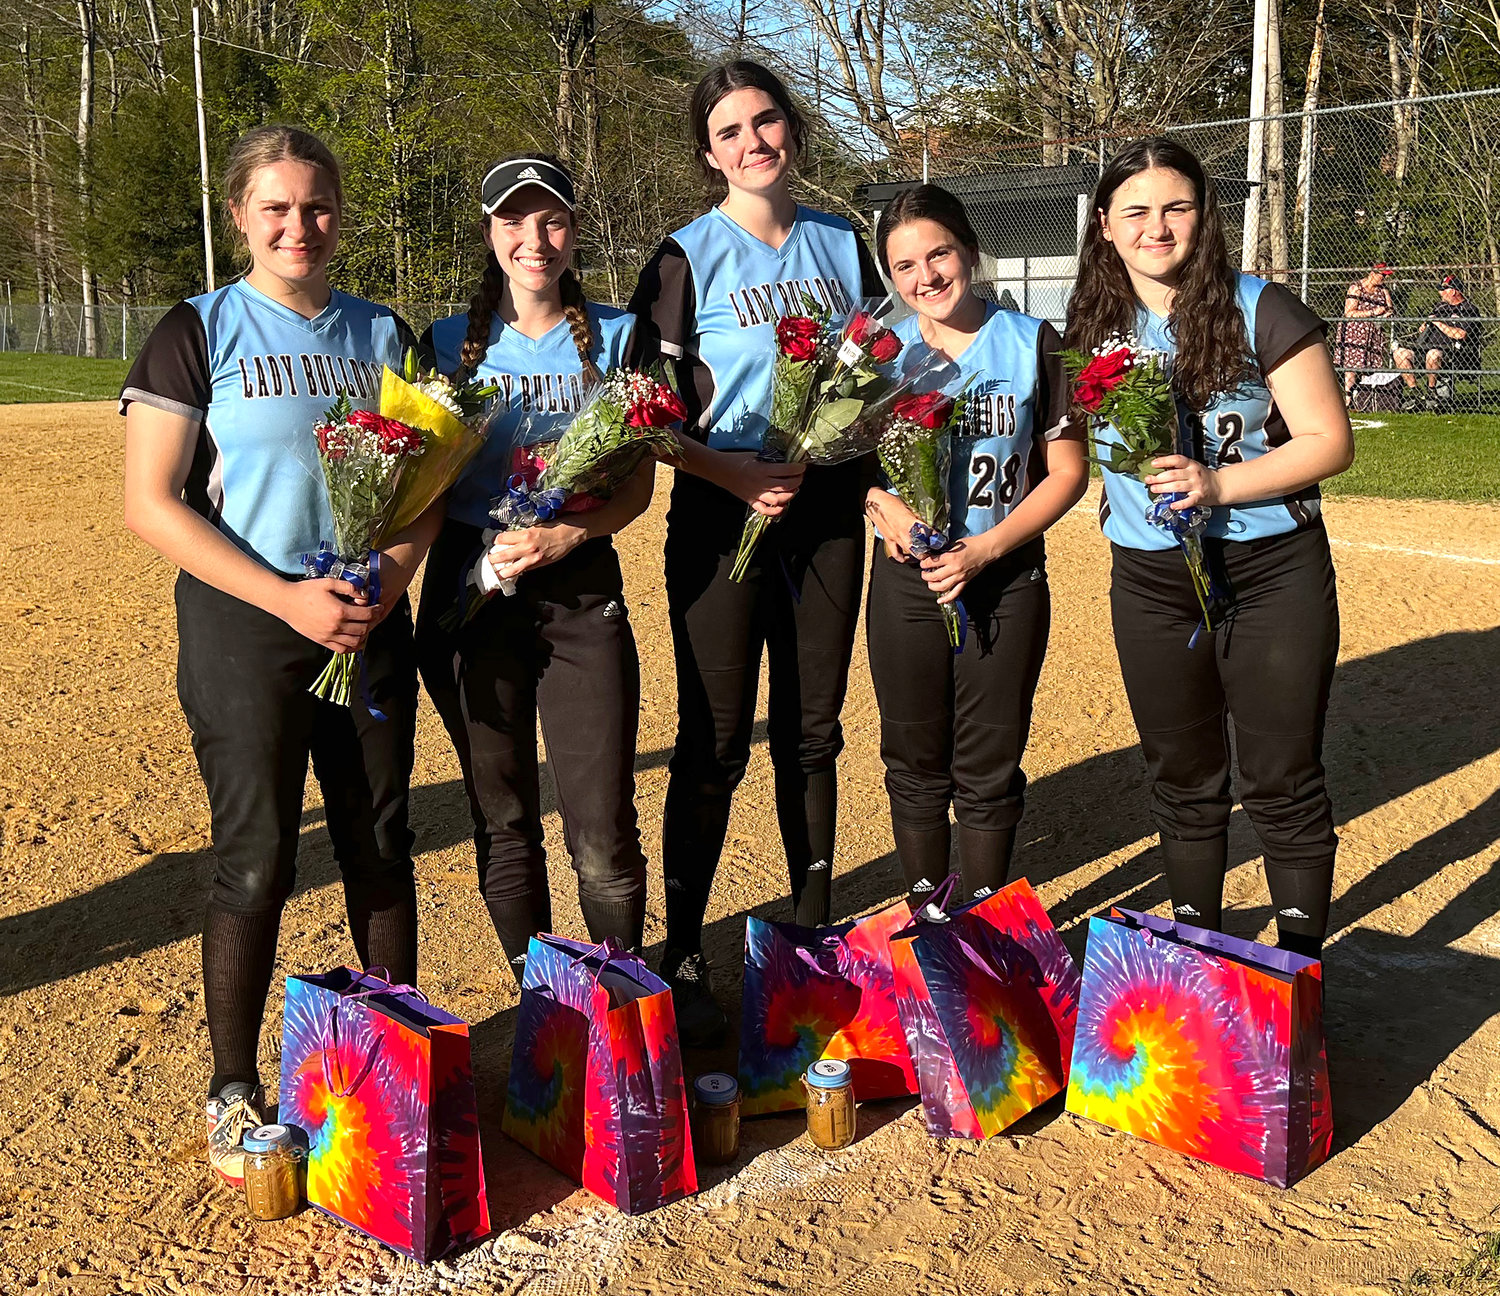 Sullivan West seniors were honored after the game. Pictured (left to right) Riley Ernst, Taylor Brustman, Taylor Wall, Brielle Arnott and Mia Nunnari.